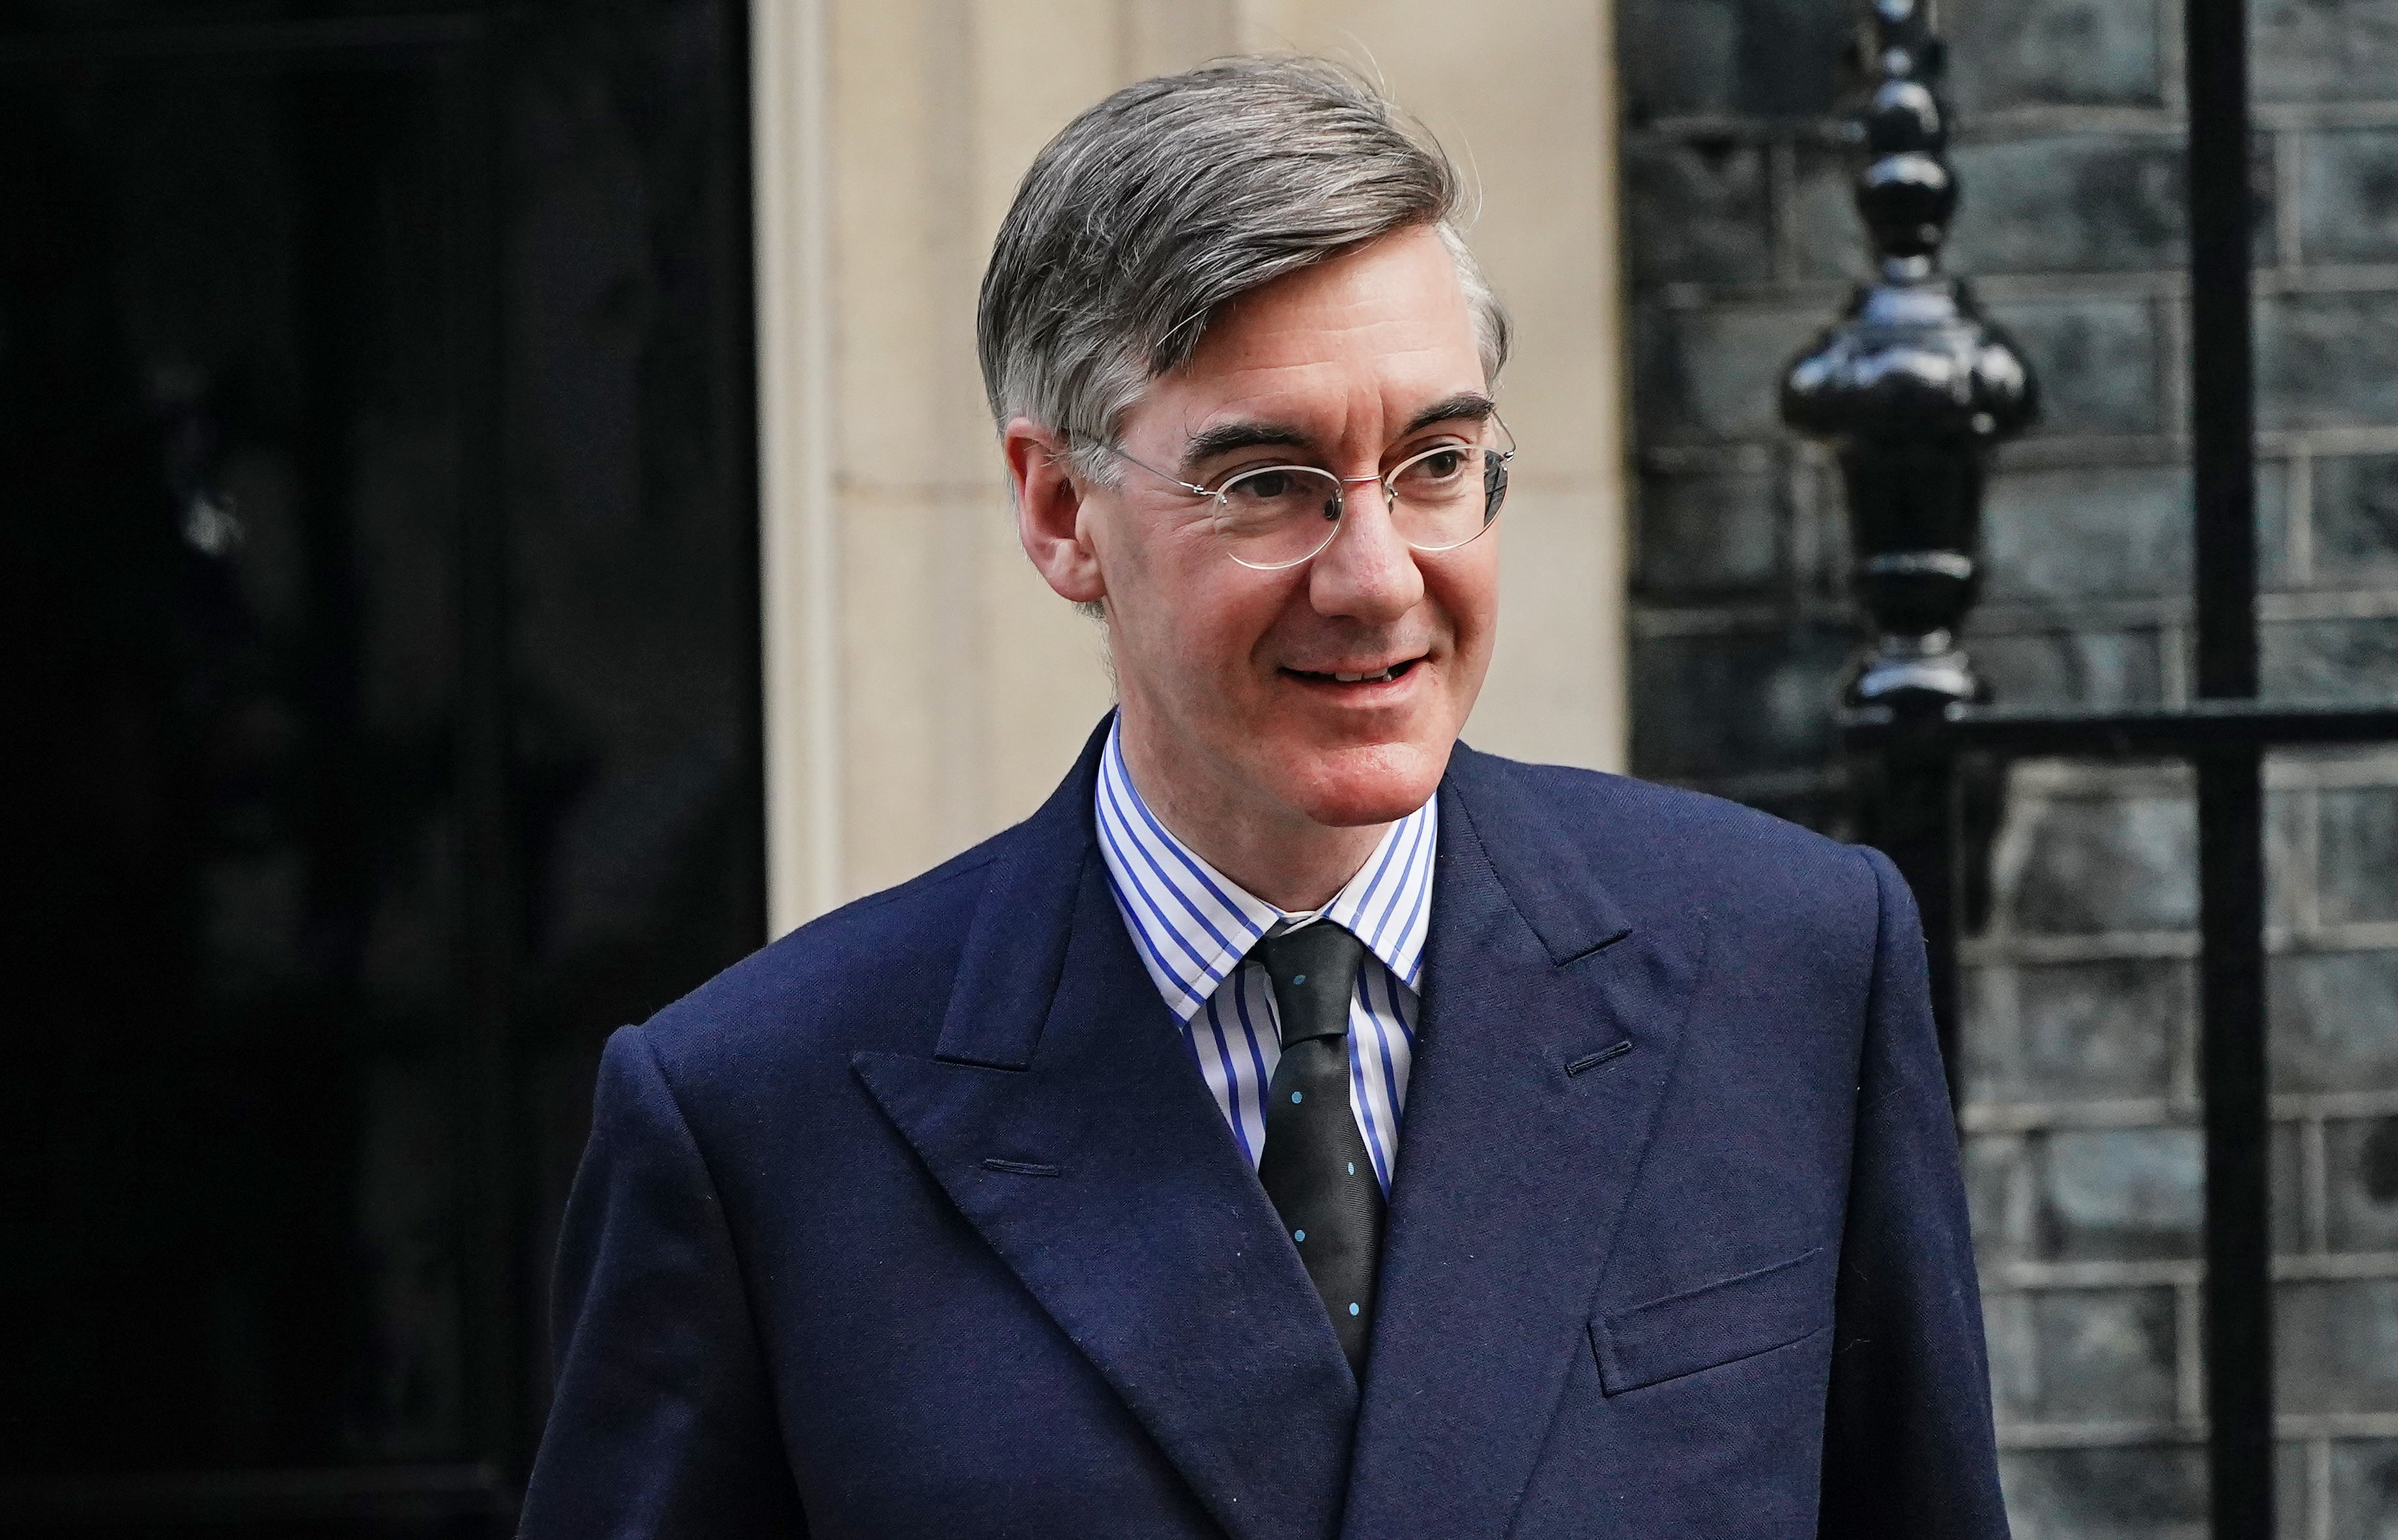 Brexit opportunities minister Jacob Rees-Mogg